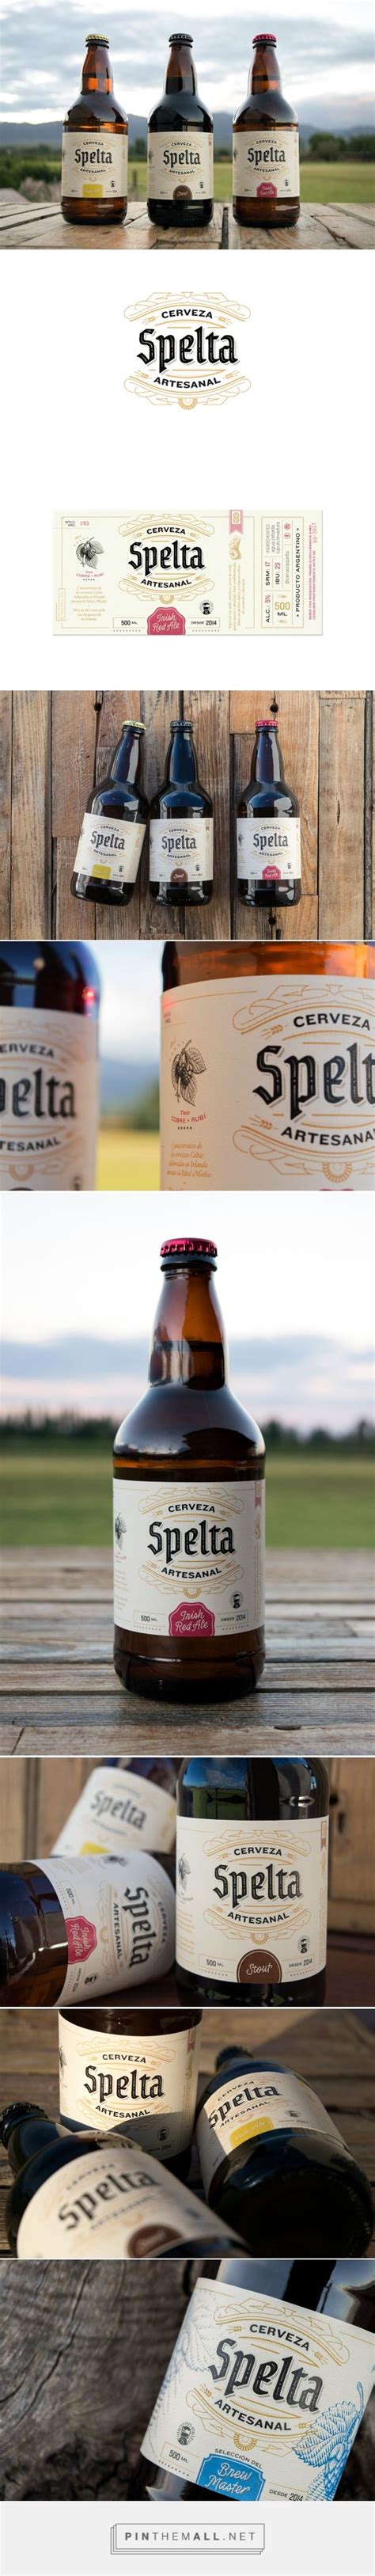 Spelta Craft Beer Packaging Of The World Creative Package Design